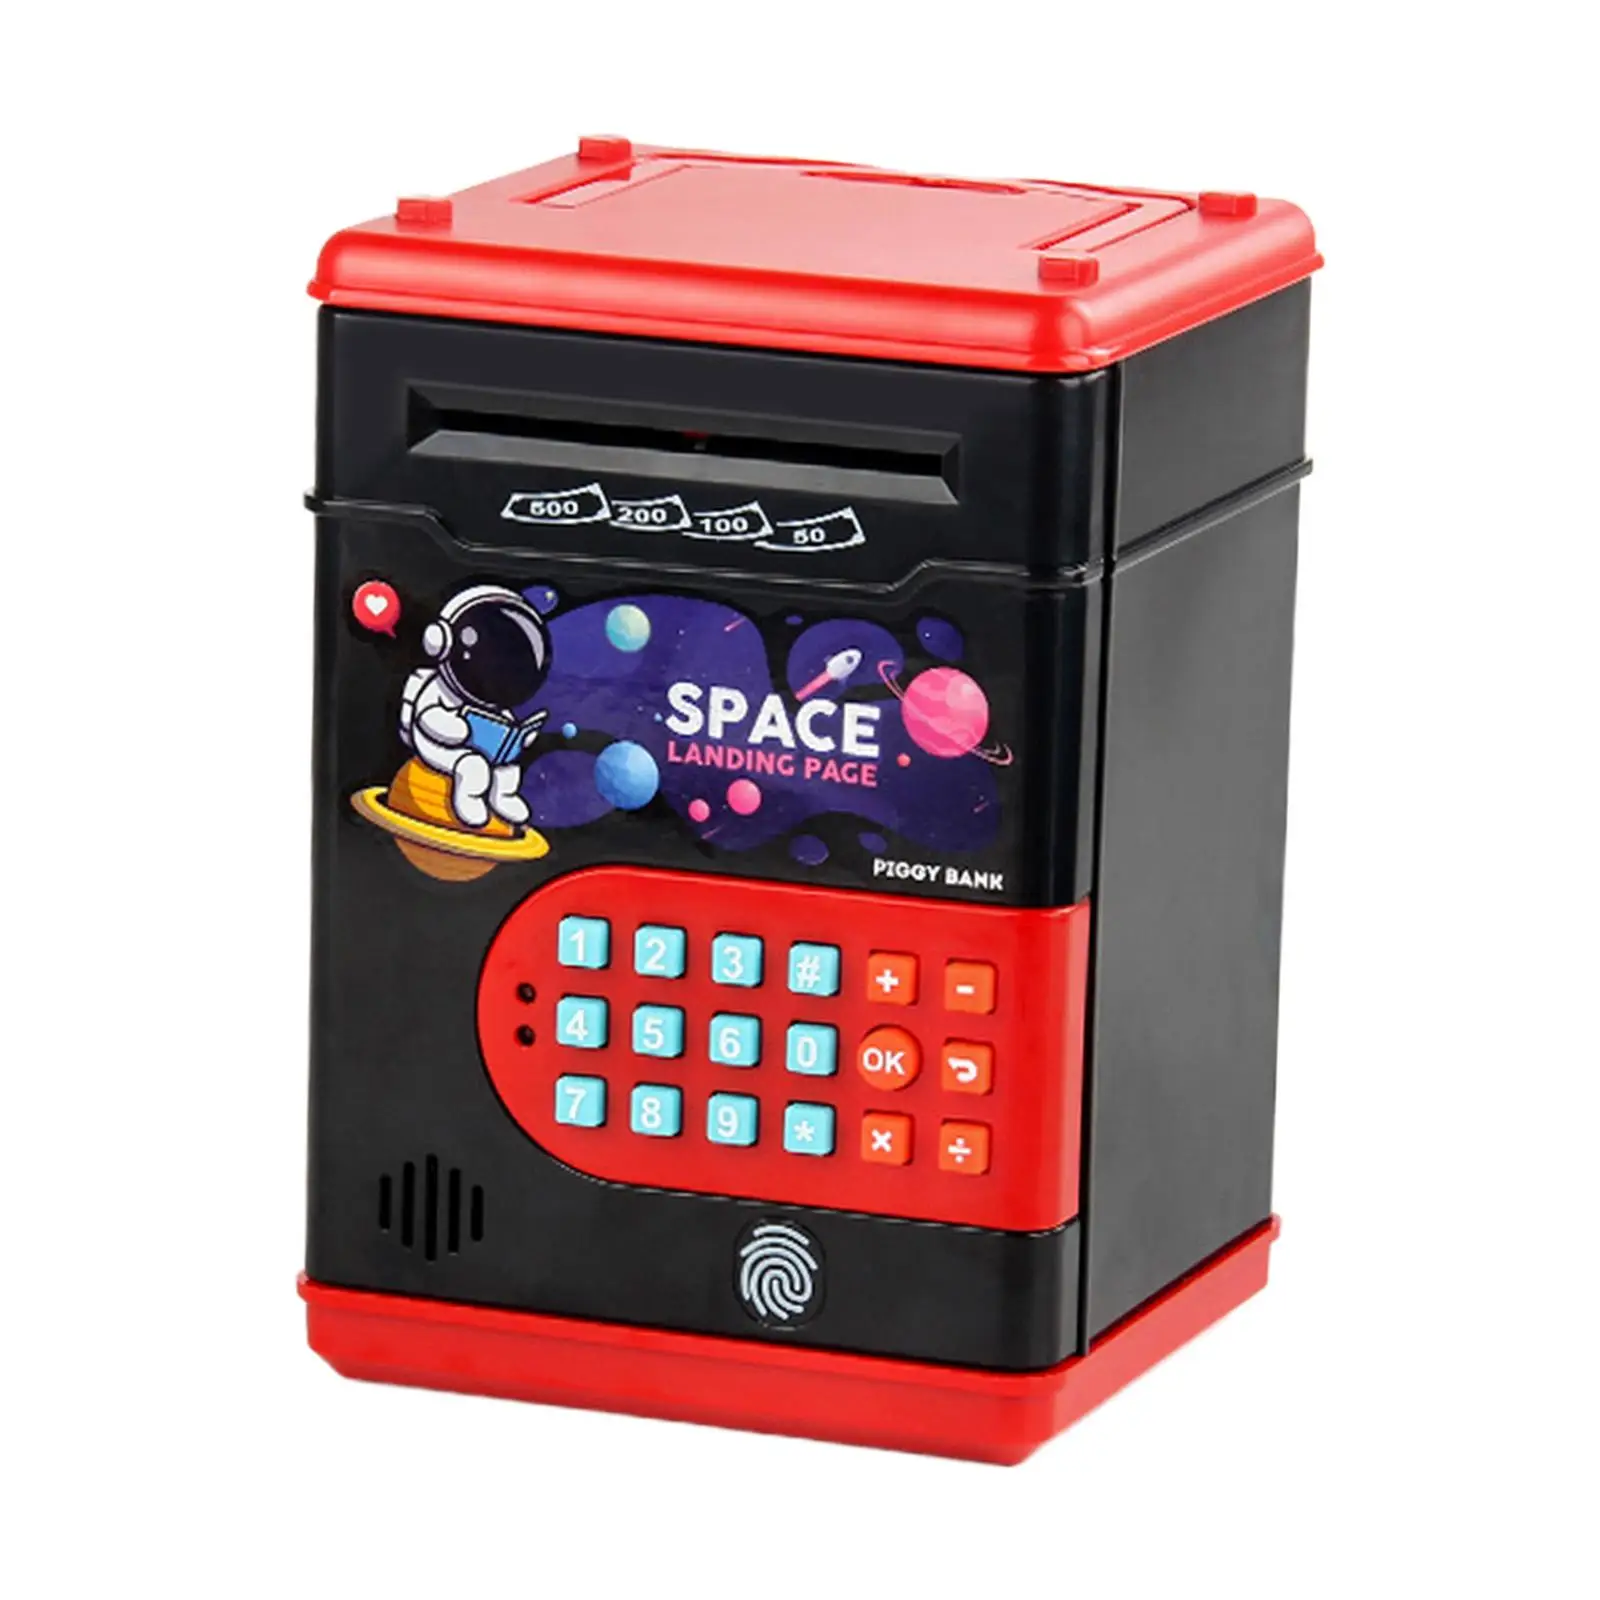 Auto Scroll Money Saving Box Toy with Fingerprint Password Protection Large Capacity Password ATM Machine Toy for Boys